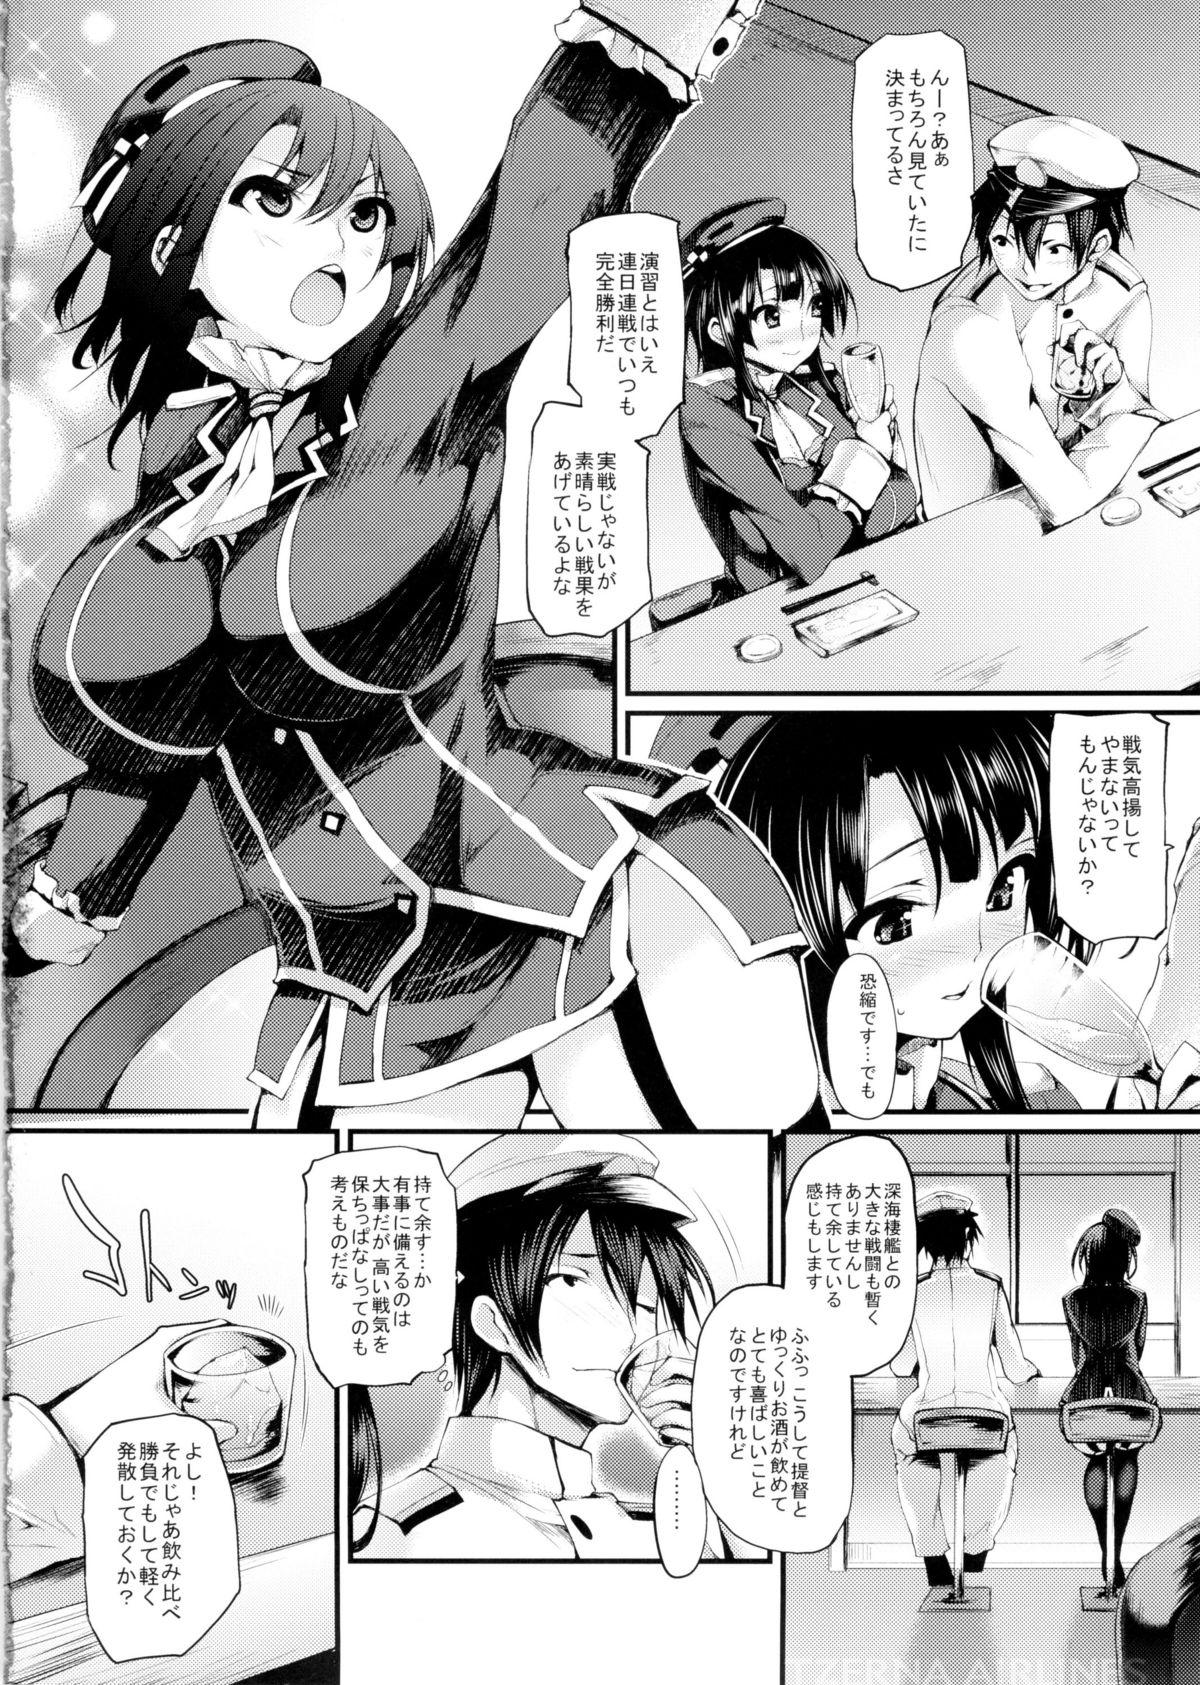 Ass Worship Versus Takao - Kantai collection Delicia - Page 5